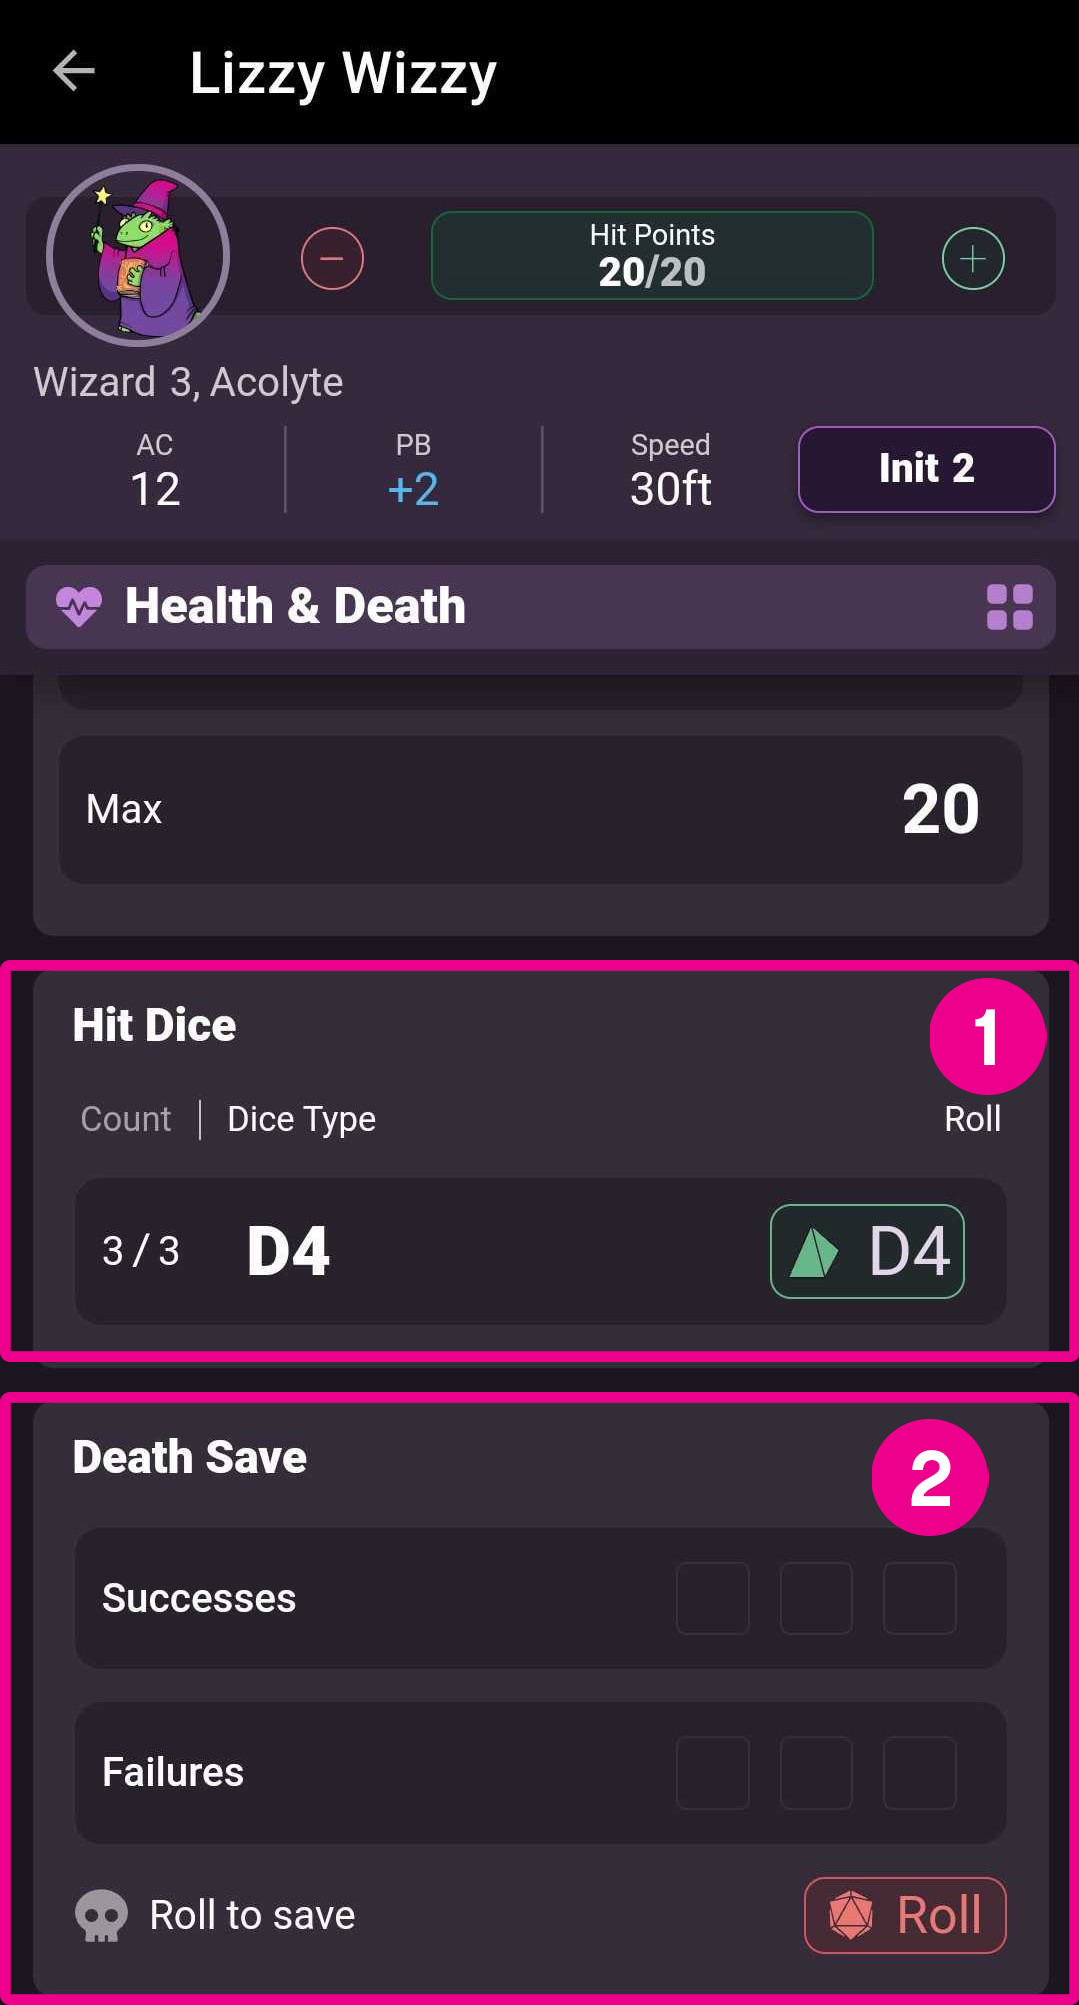 19._hit_dice_and_death_saves.jpg